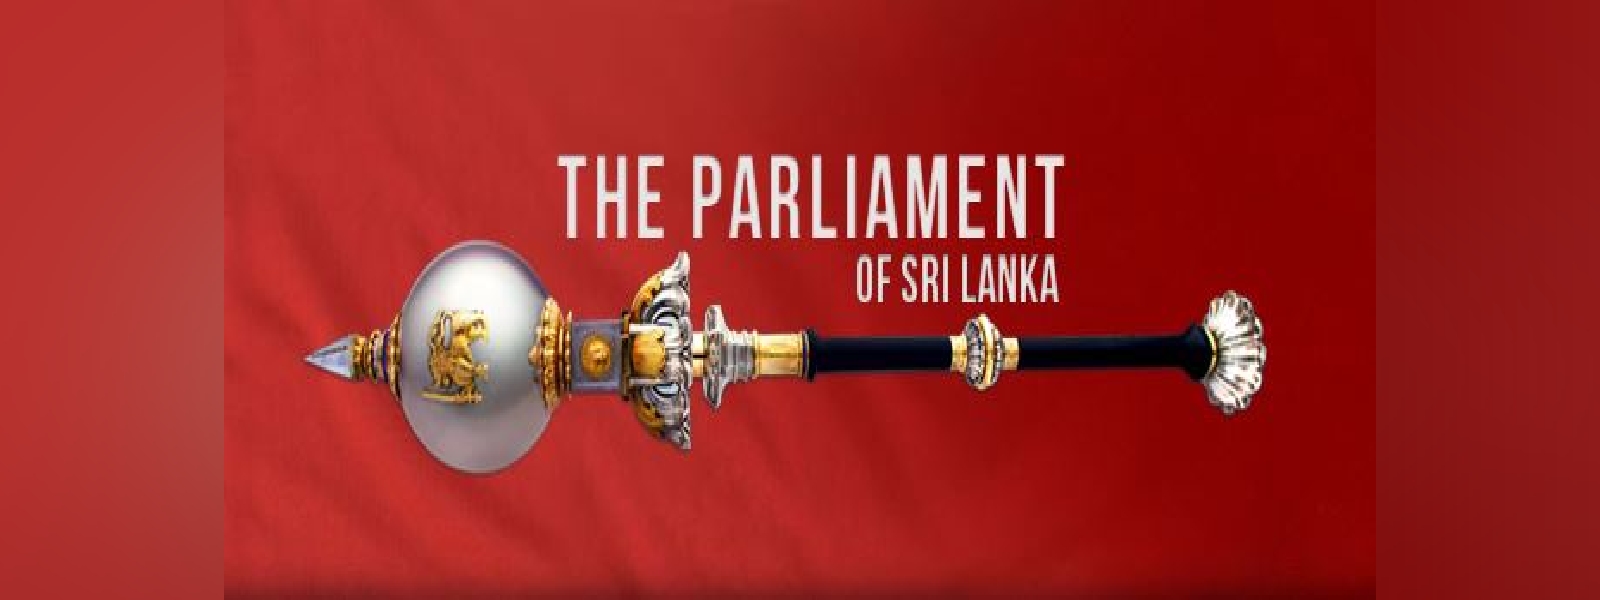 Parliament meets after President’s resignation